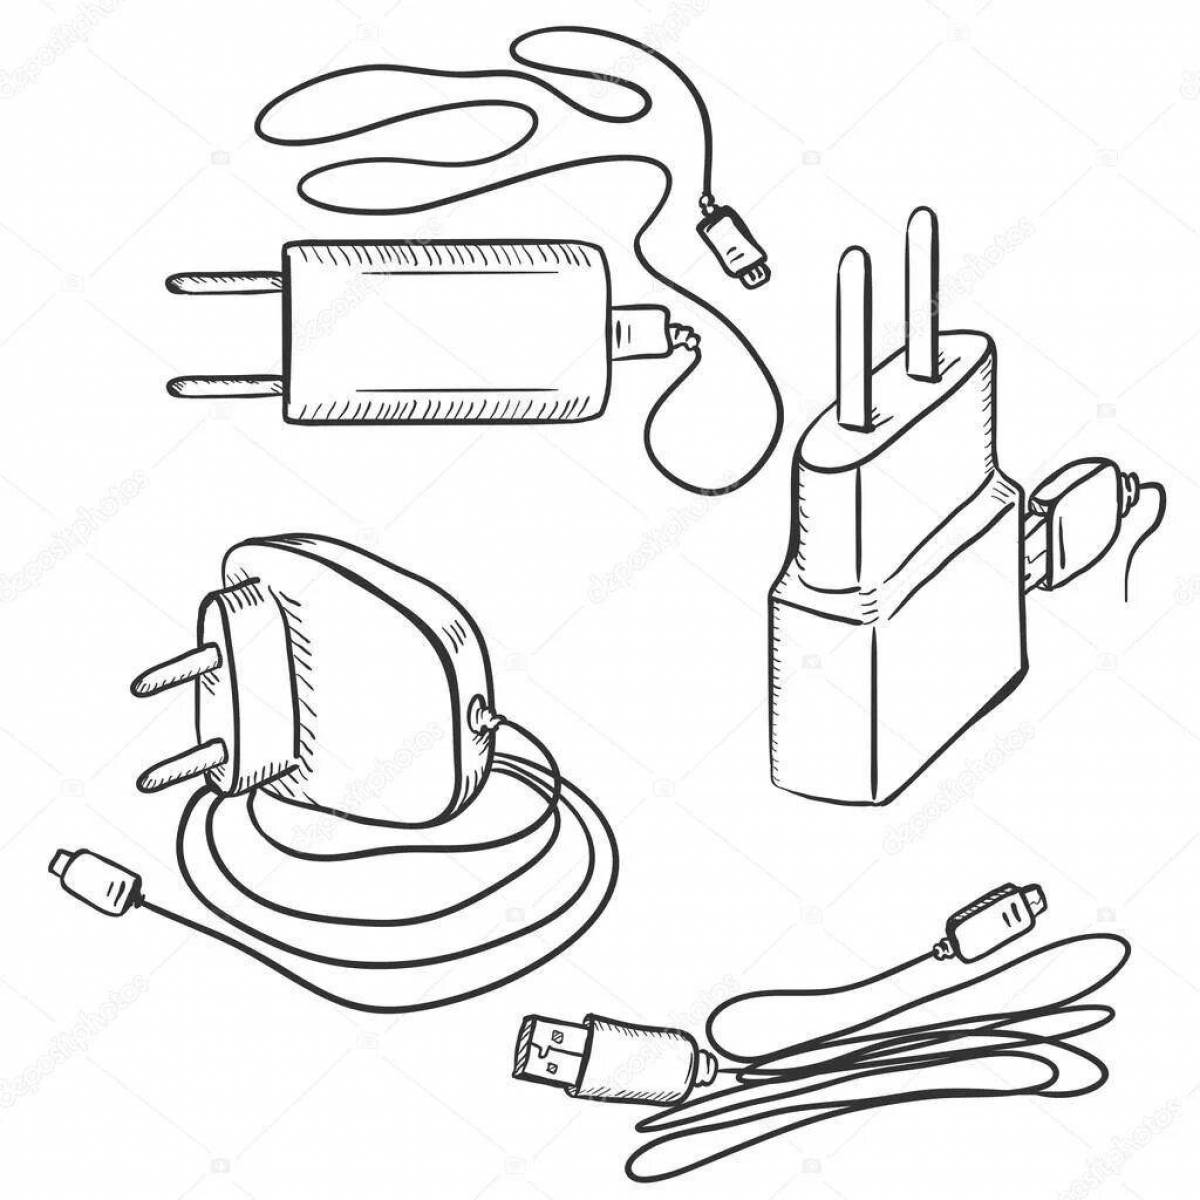 Funny phone charger coloring book